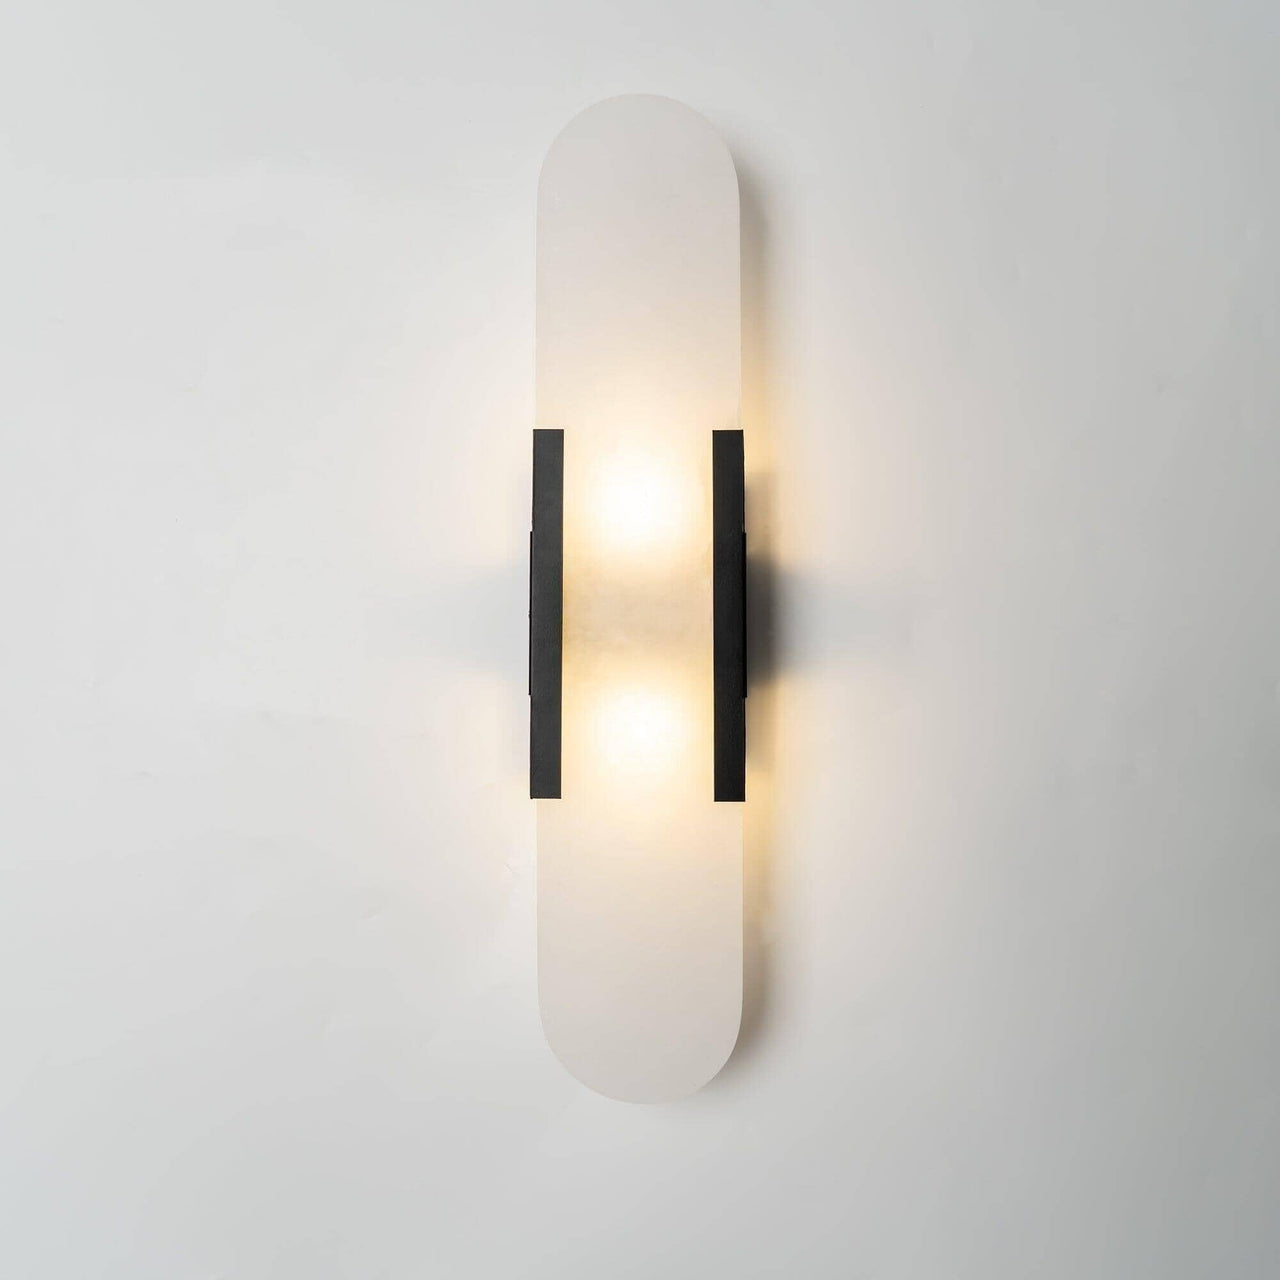 "Alabaster Dream" Marble Wall Lamp Sconce in Black / Gold Wall Sconce Lamp Artedimo Black Dia 10cm x H 35cm / 3.9″ x H 13.8″ 